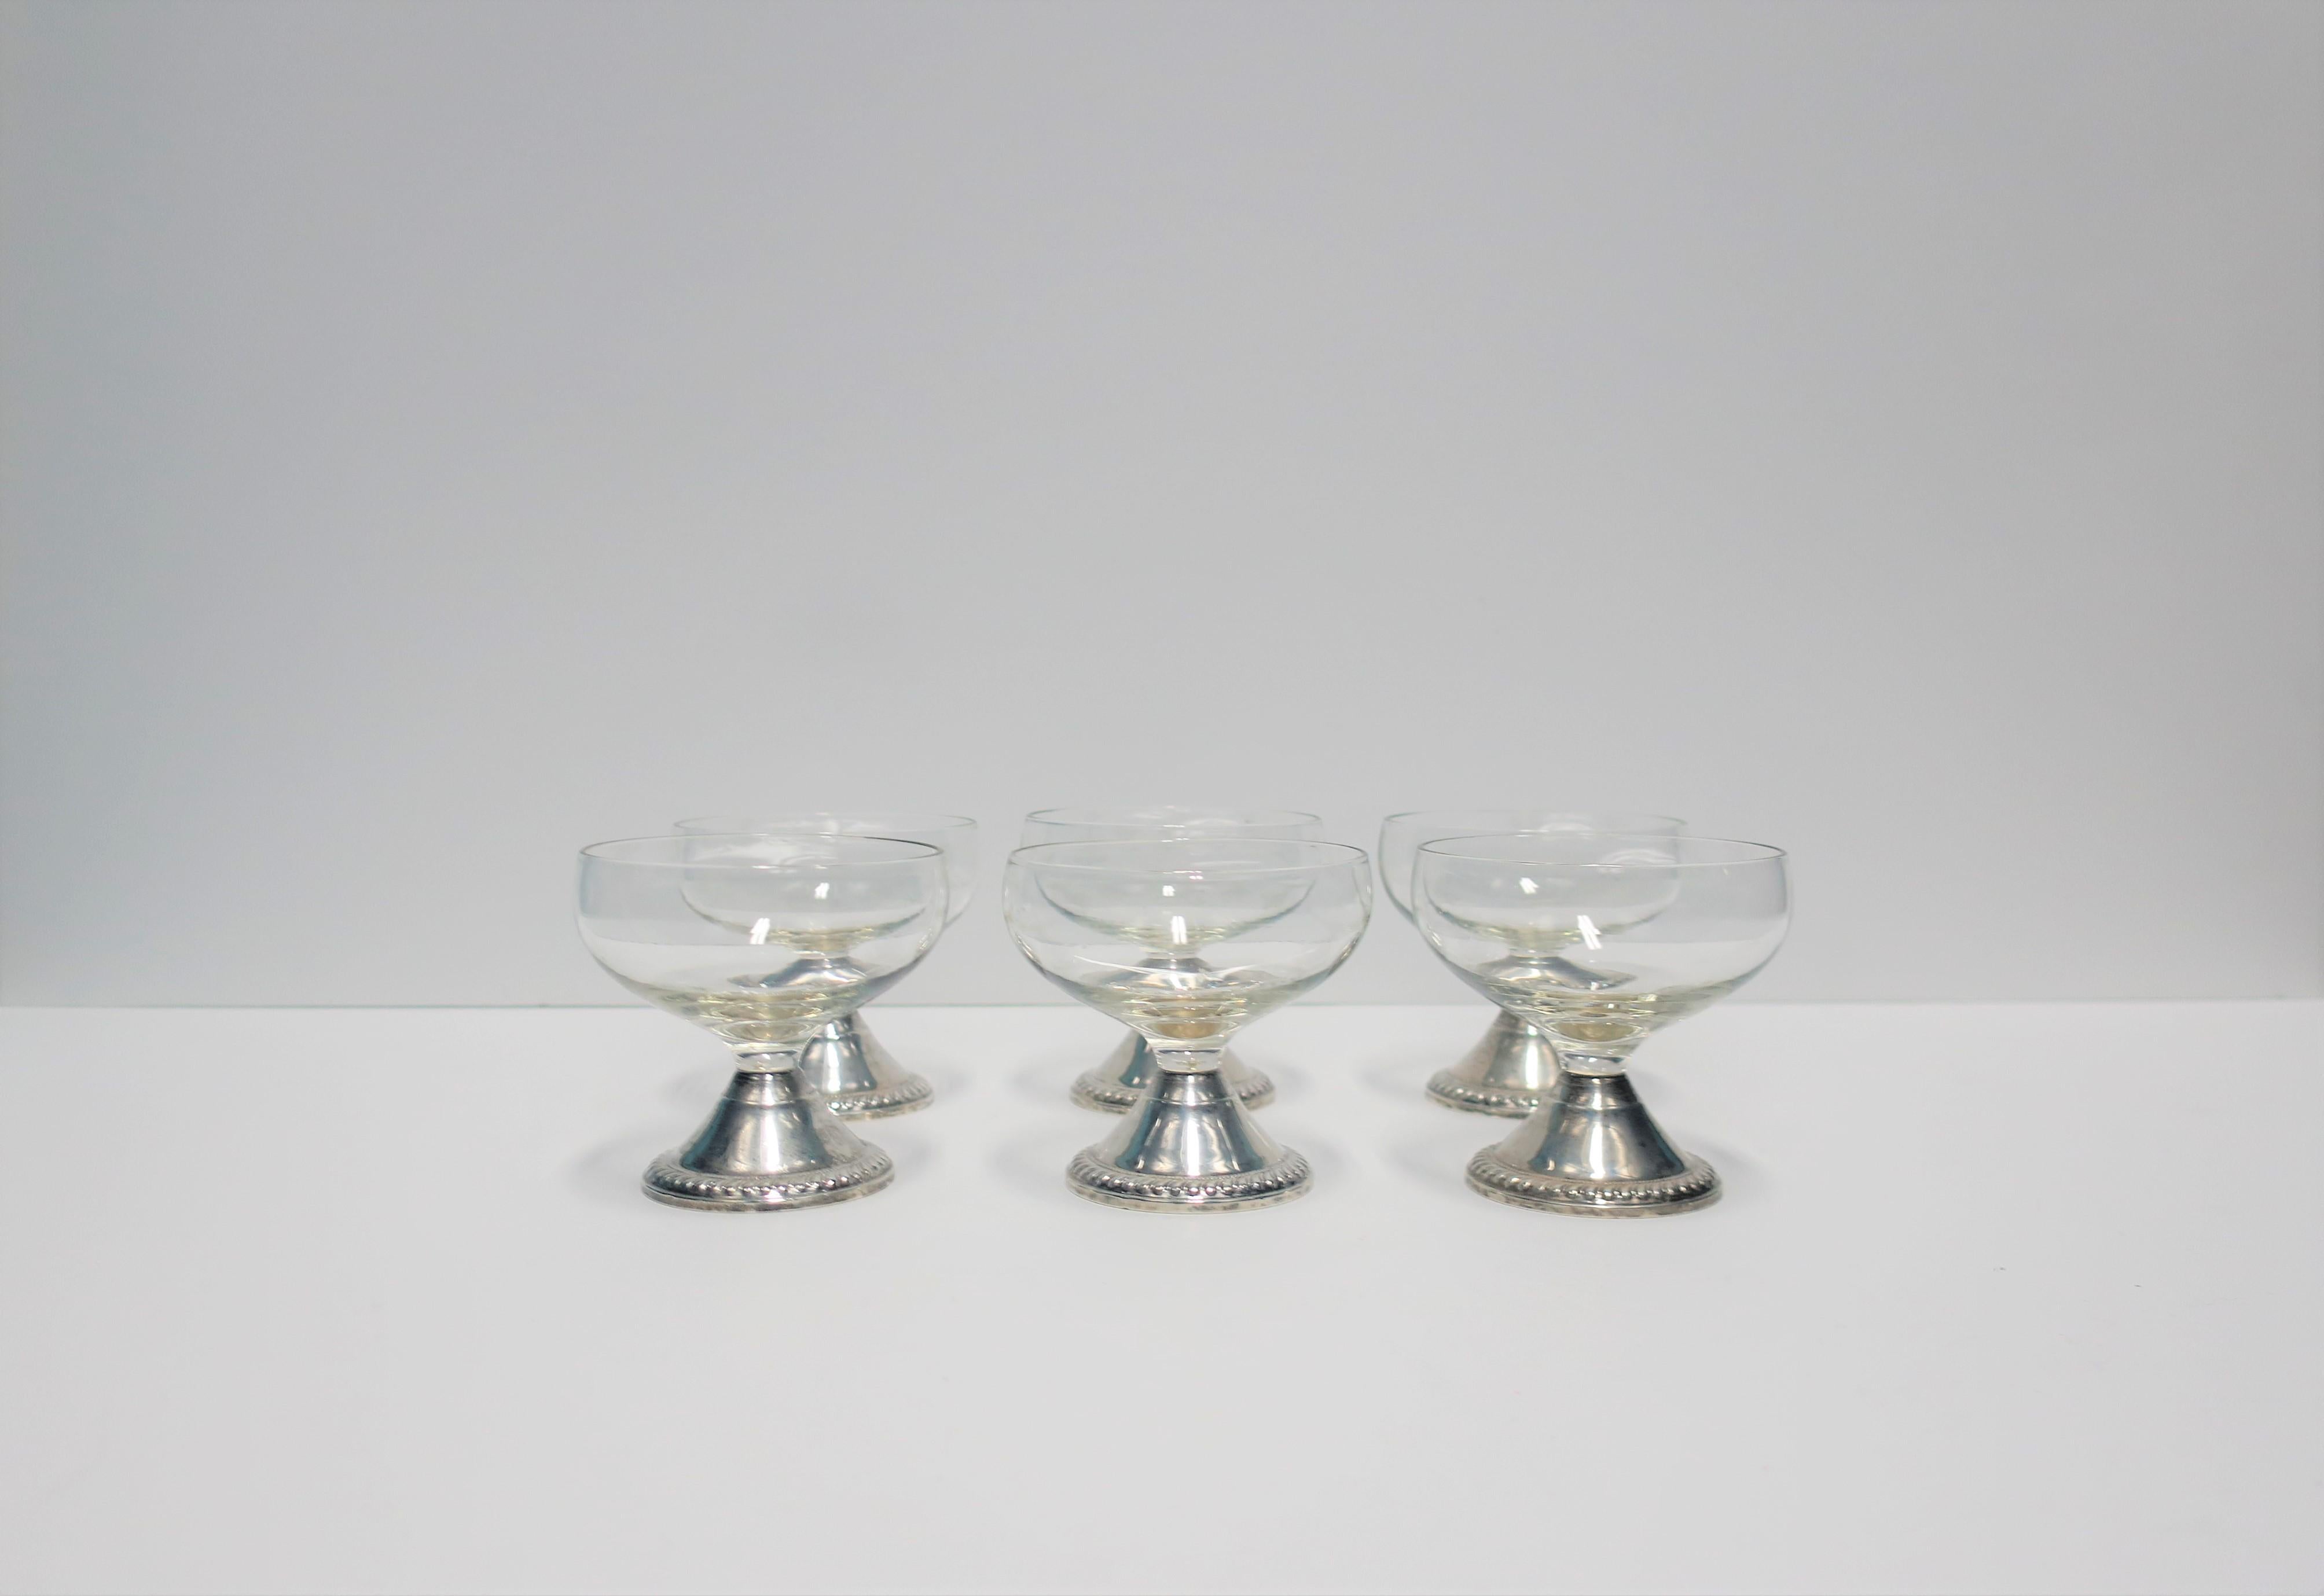 A beautiful set of 6 mid-20th century Champagne or cocktail glasses with sterling silver bases, by Duchin. Set could also be used to a cocktail or dessert. With maker's mark and sterling silver marking on bottom as show in image #4. Beautiful for